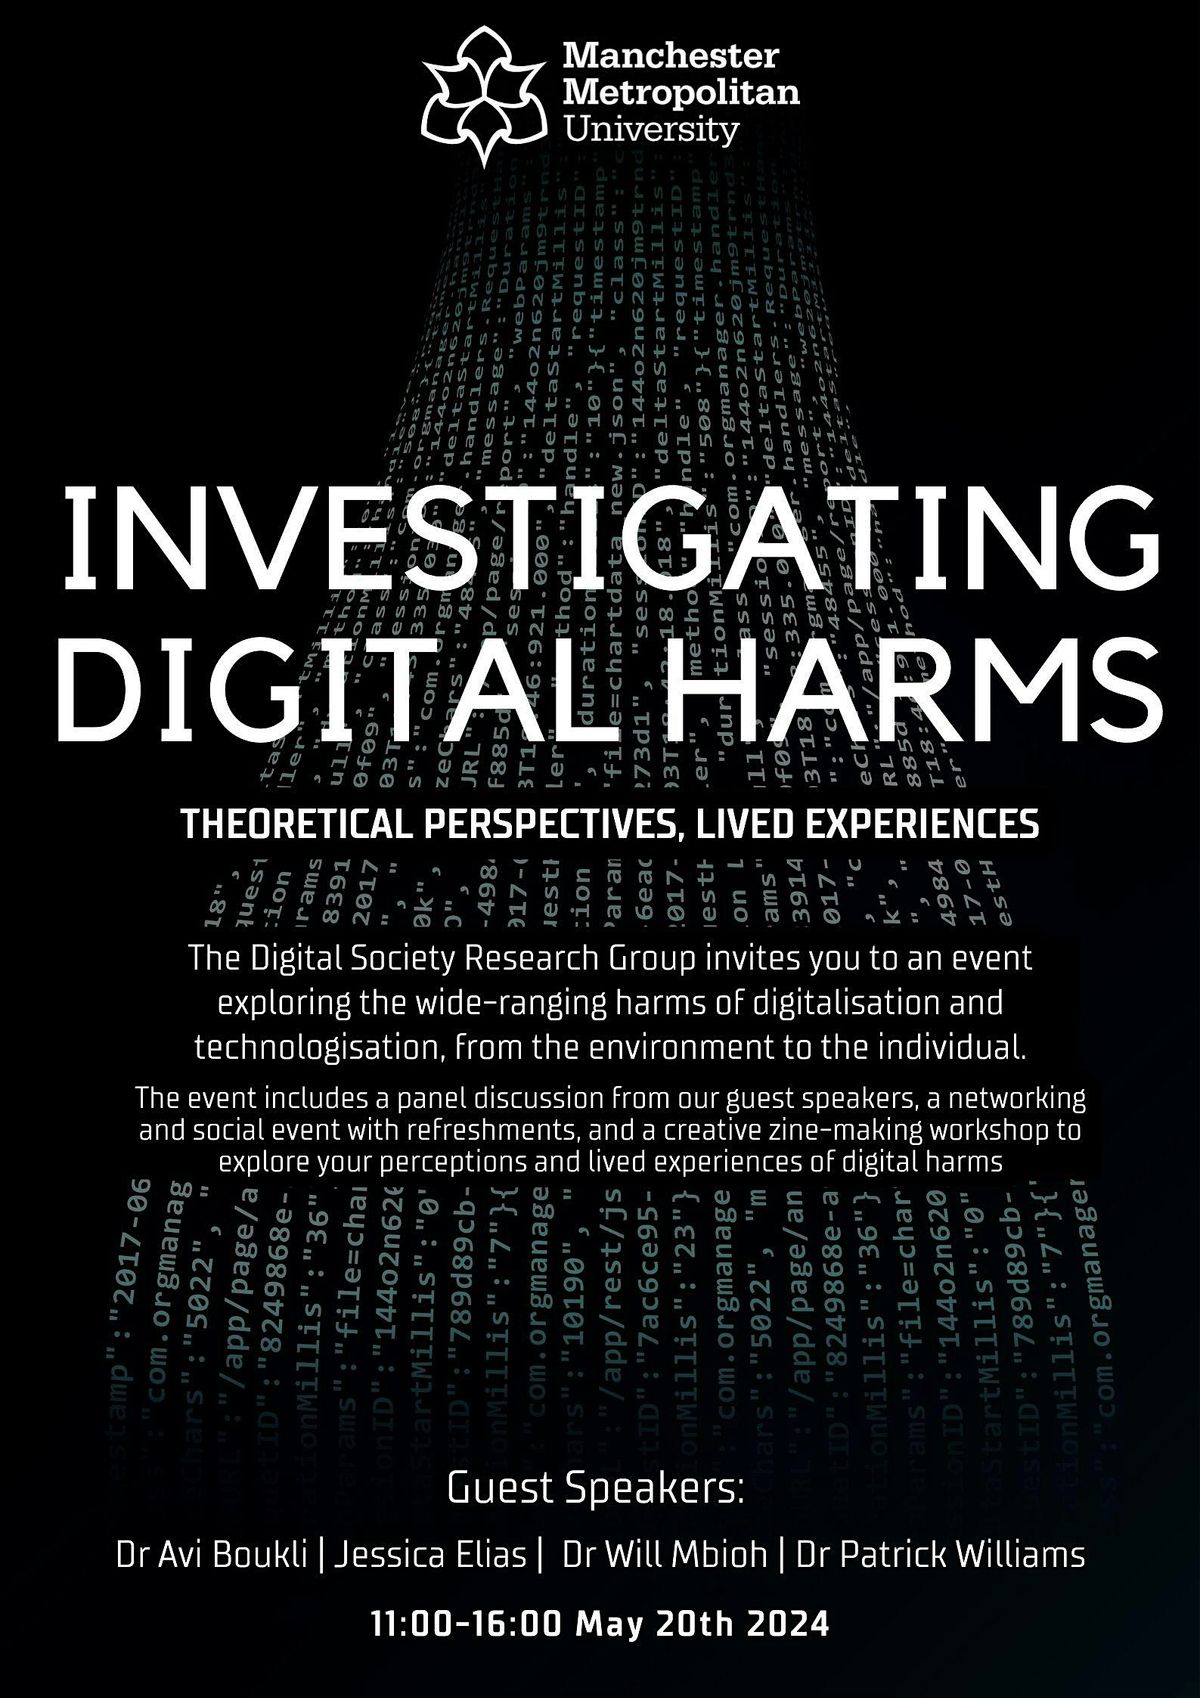 Digital Harms: Theoretical Perspectives, Lived Experiences